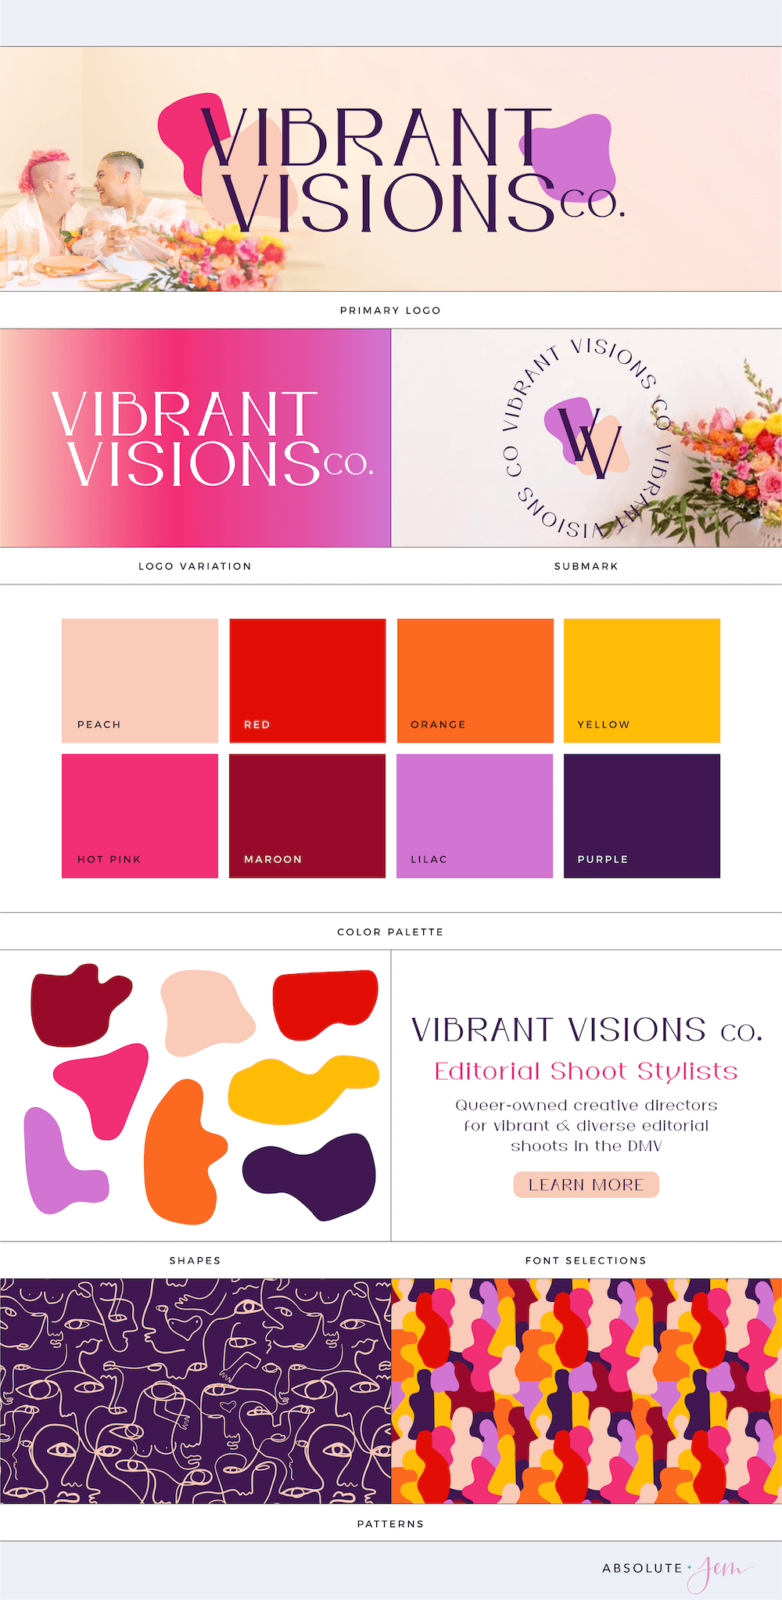 Vibrant Visions Co. Brand Board showing logos, color palette, typography, and patterns